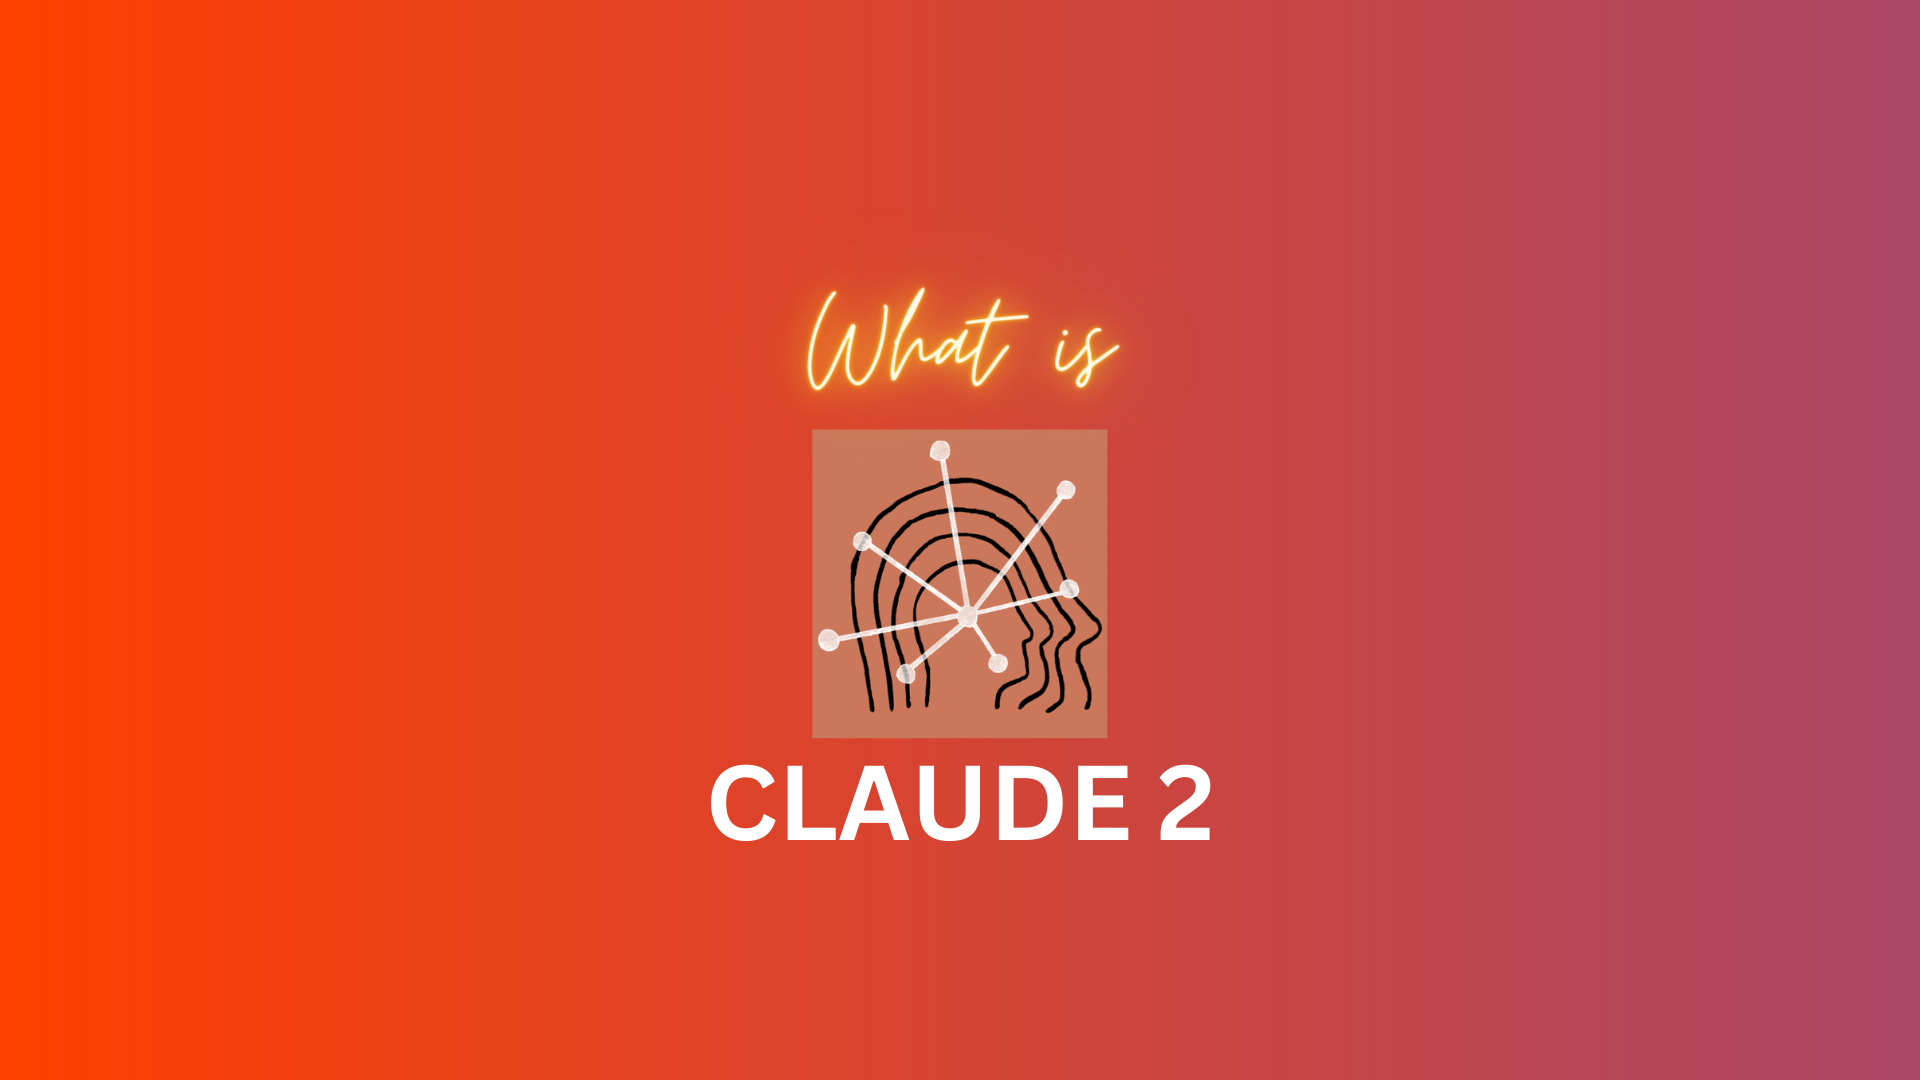 Claude 2 logo on blended red and mauve background.